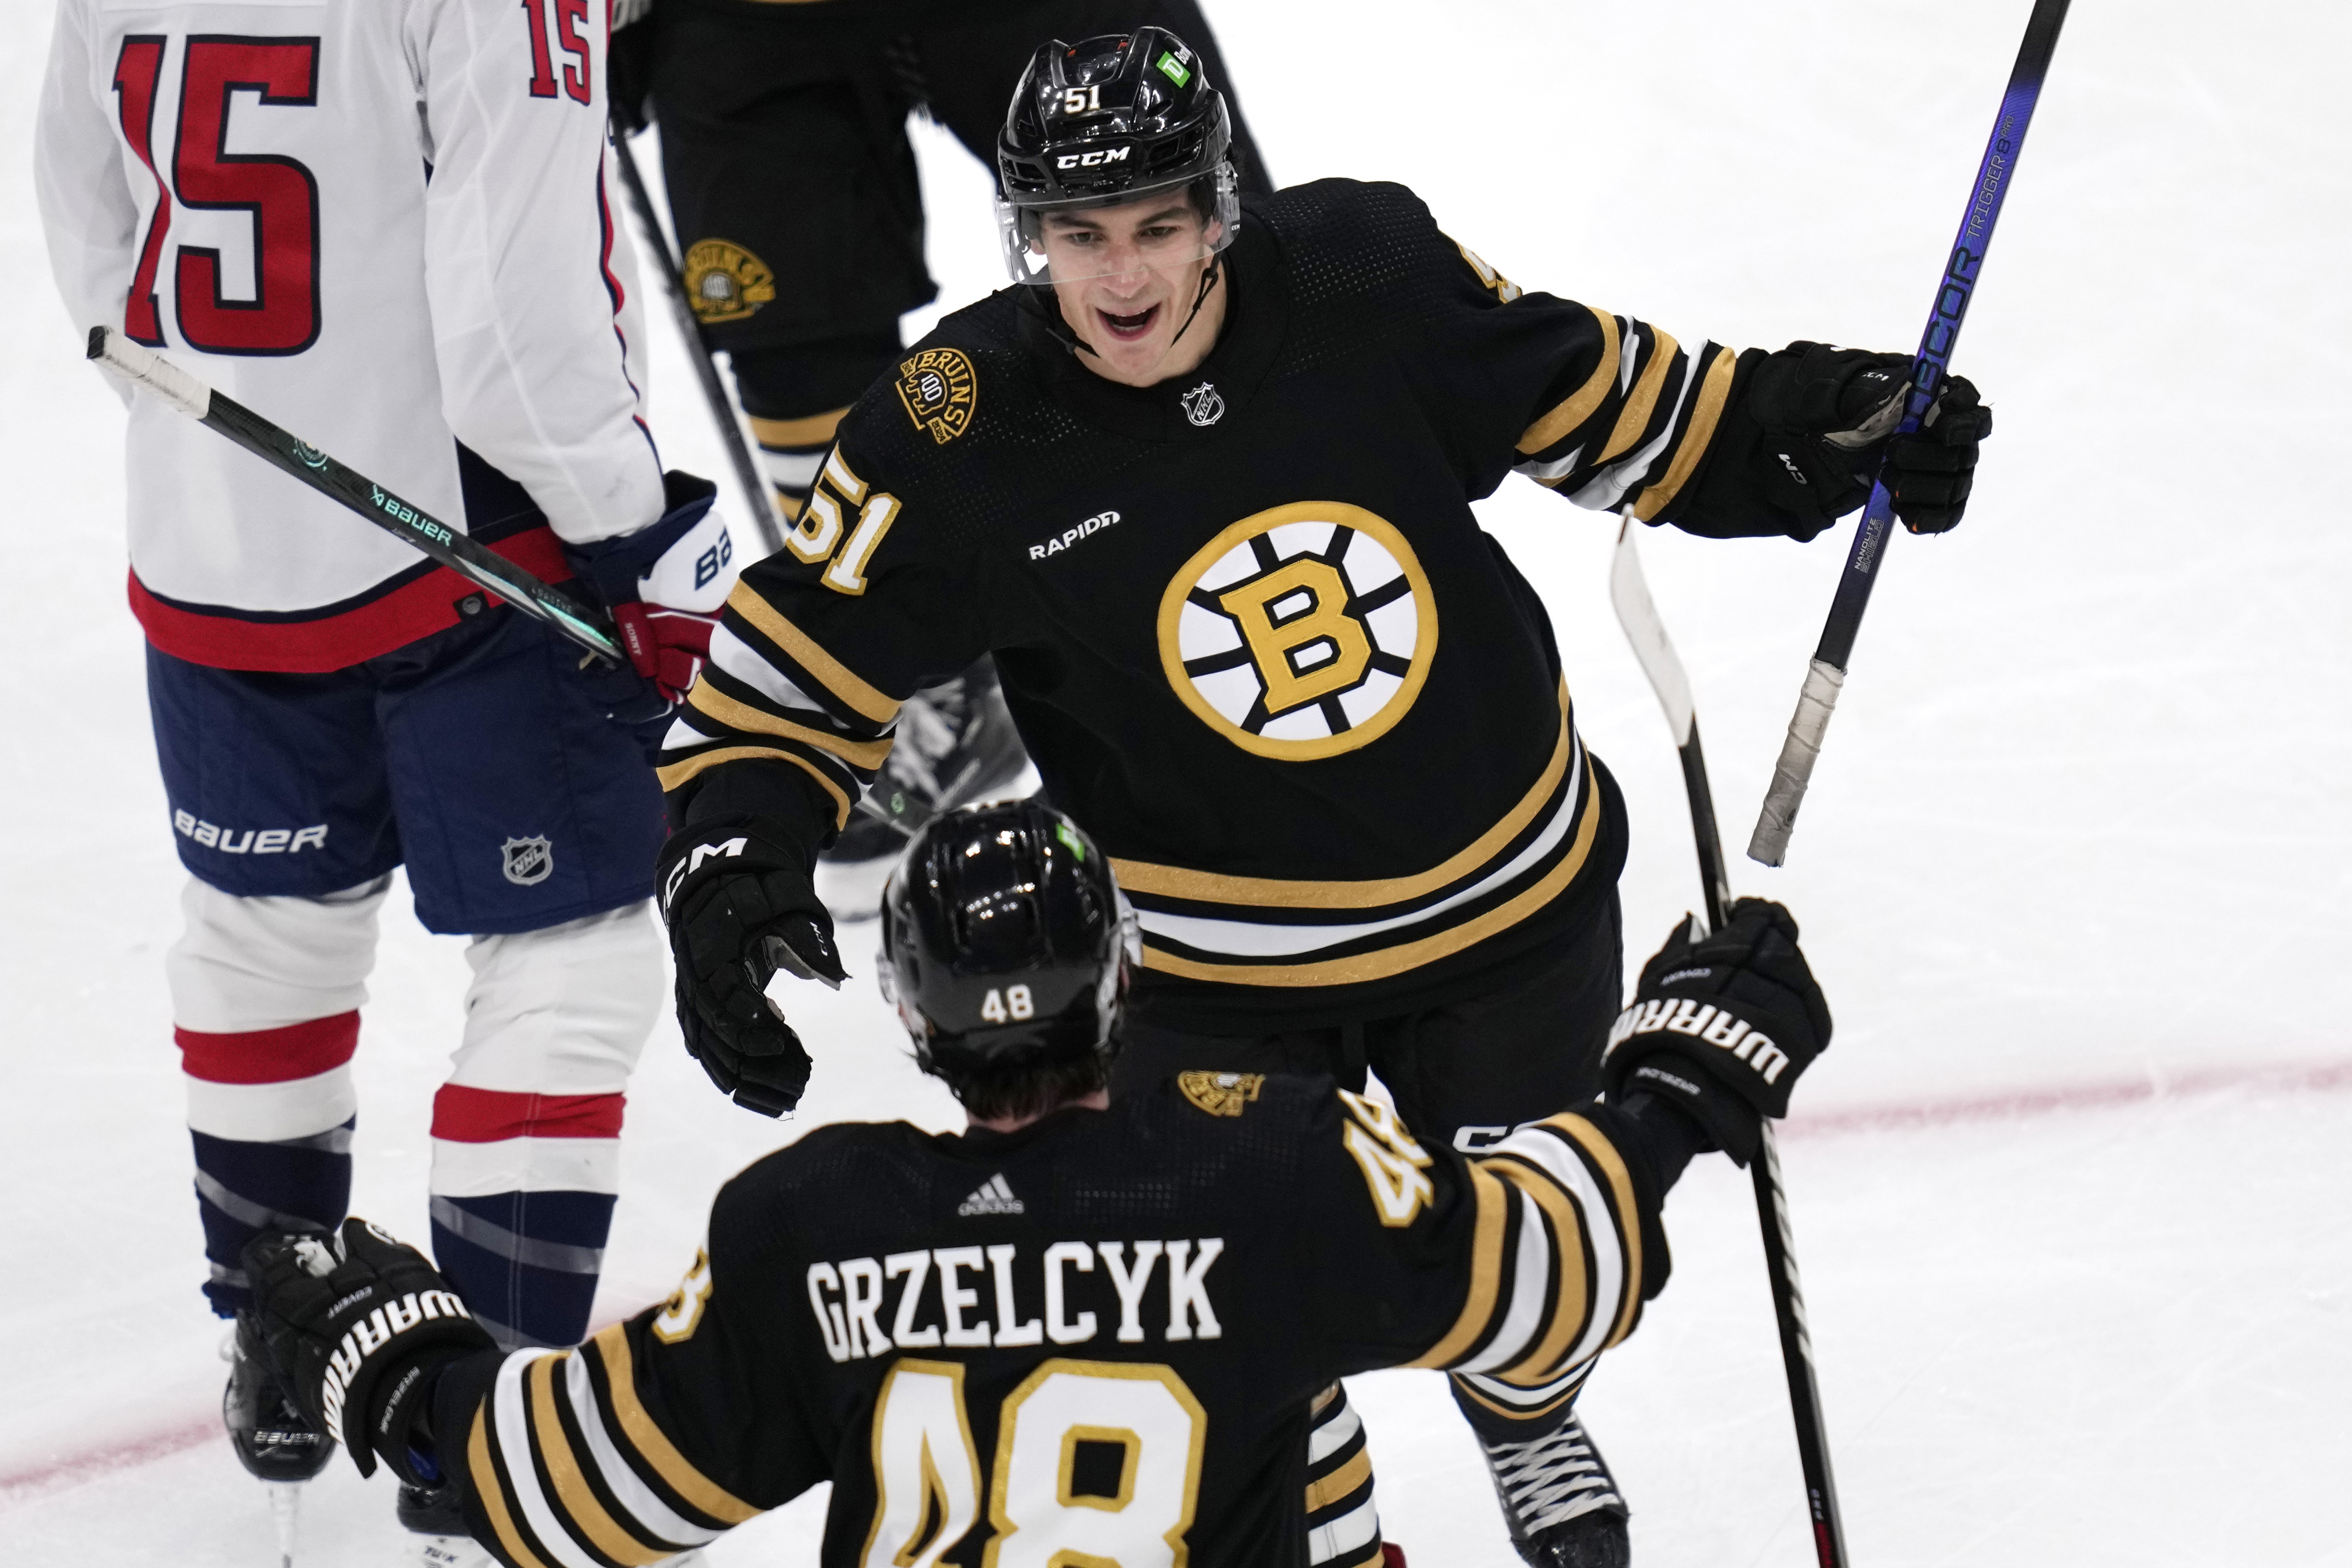 The Bruins are back, winning over fans old and new